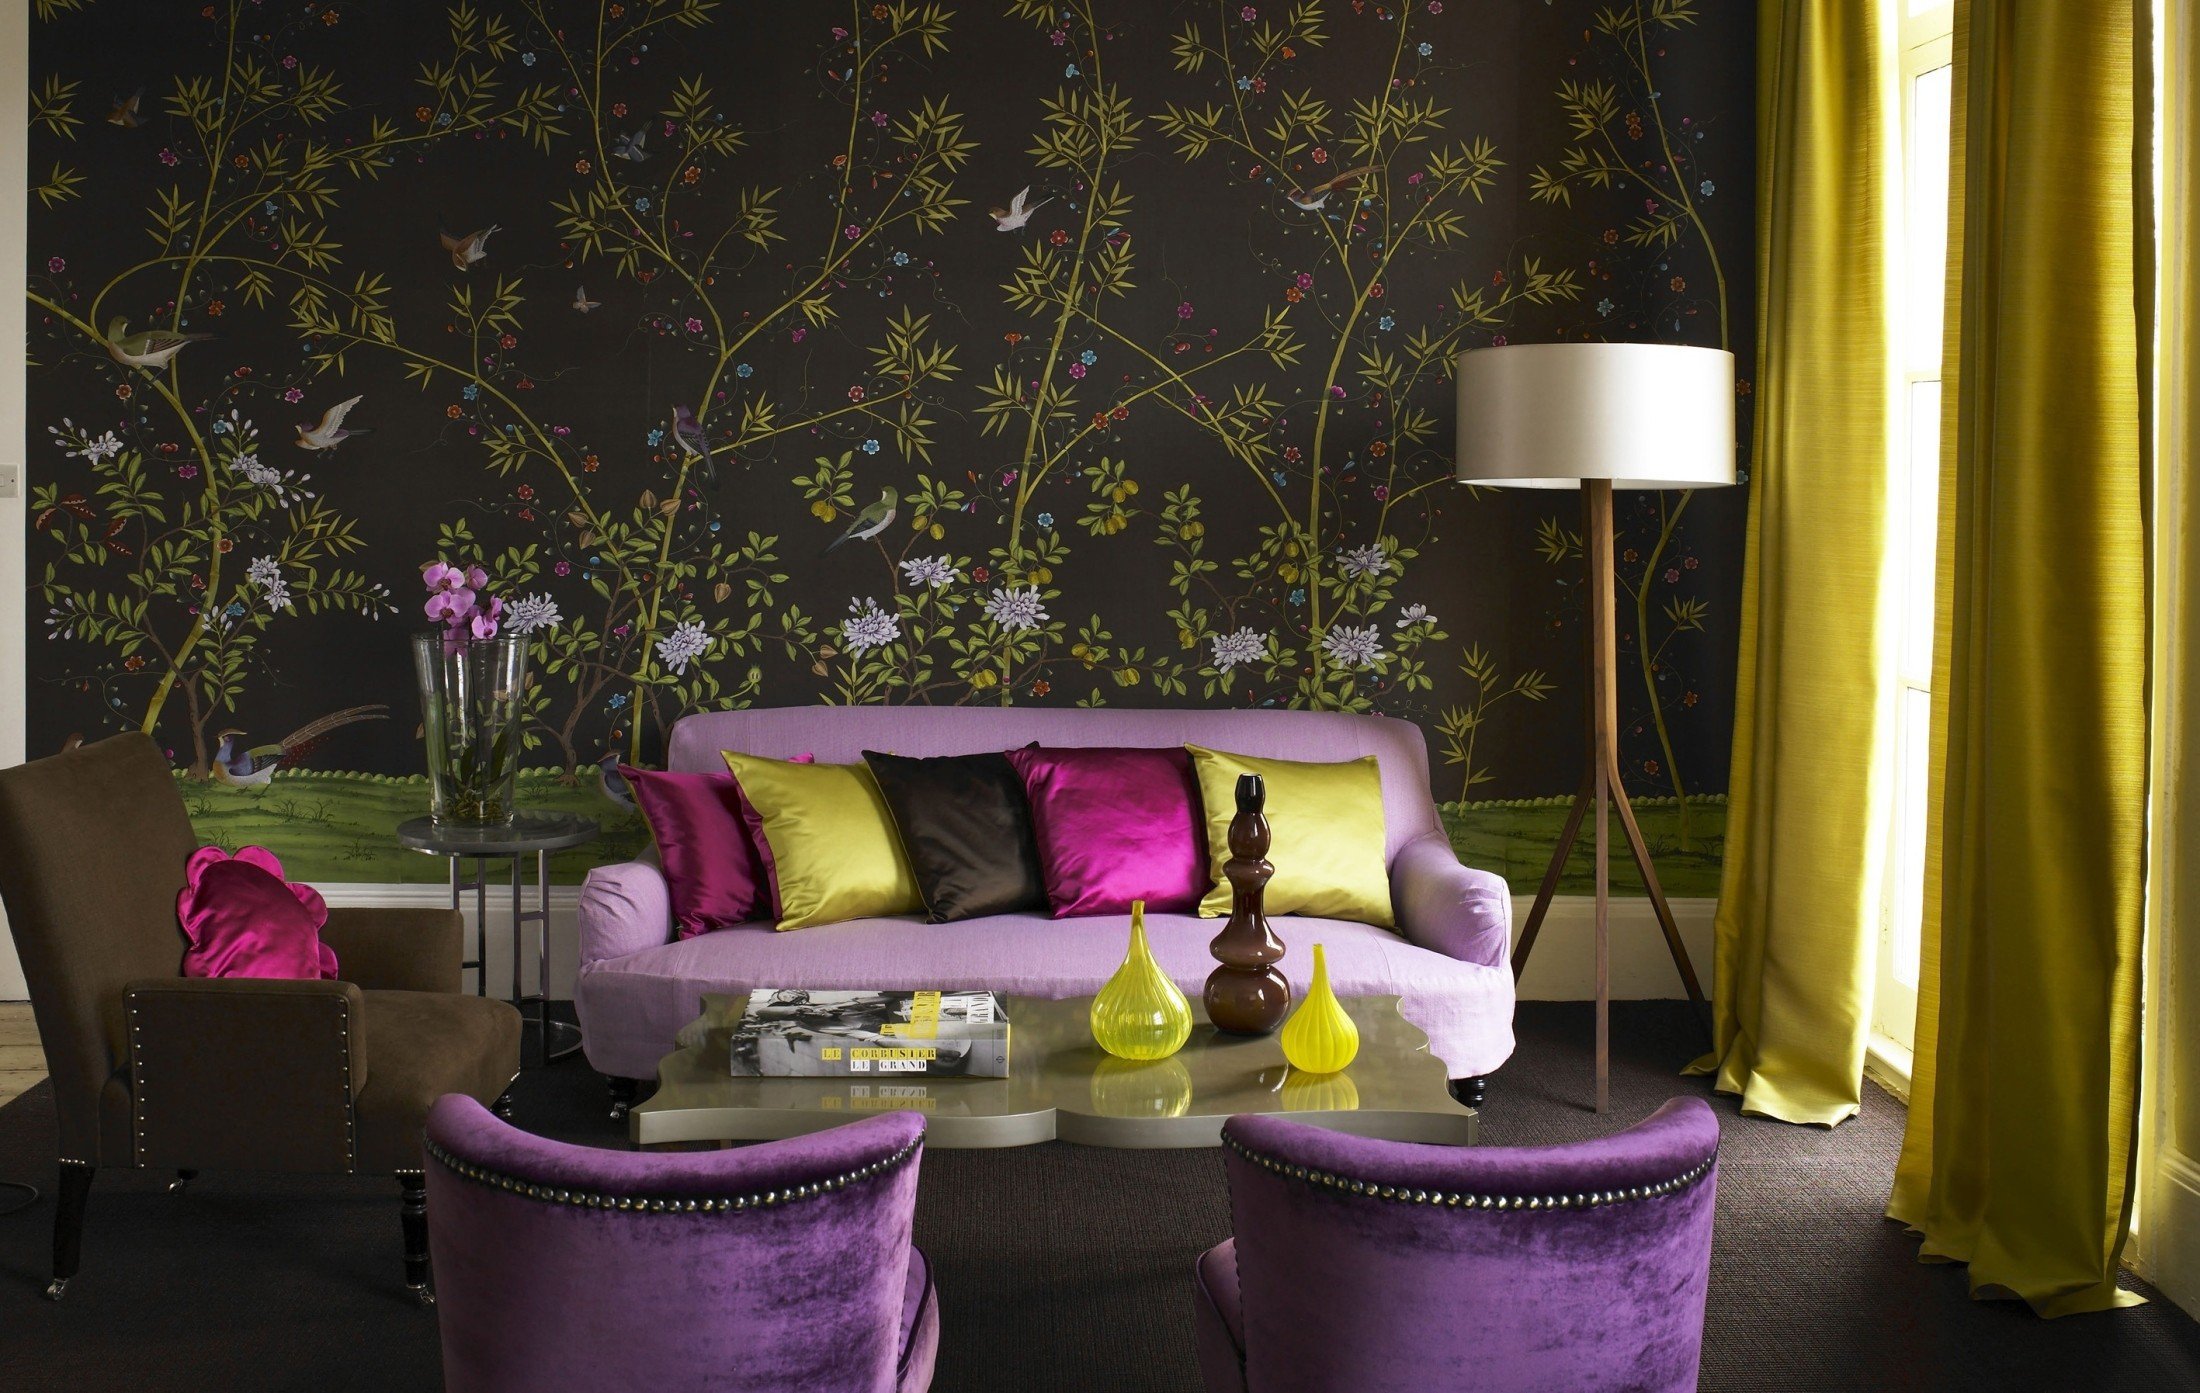 room, Interior design, Couch, Floral, Vases, Curtains Wallpaper